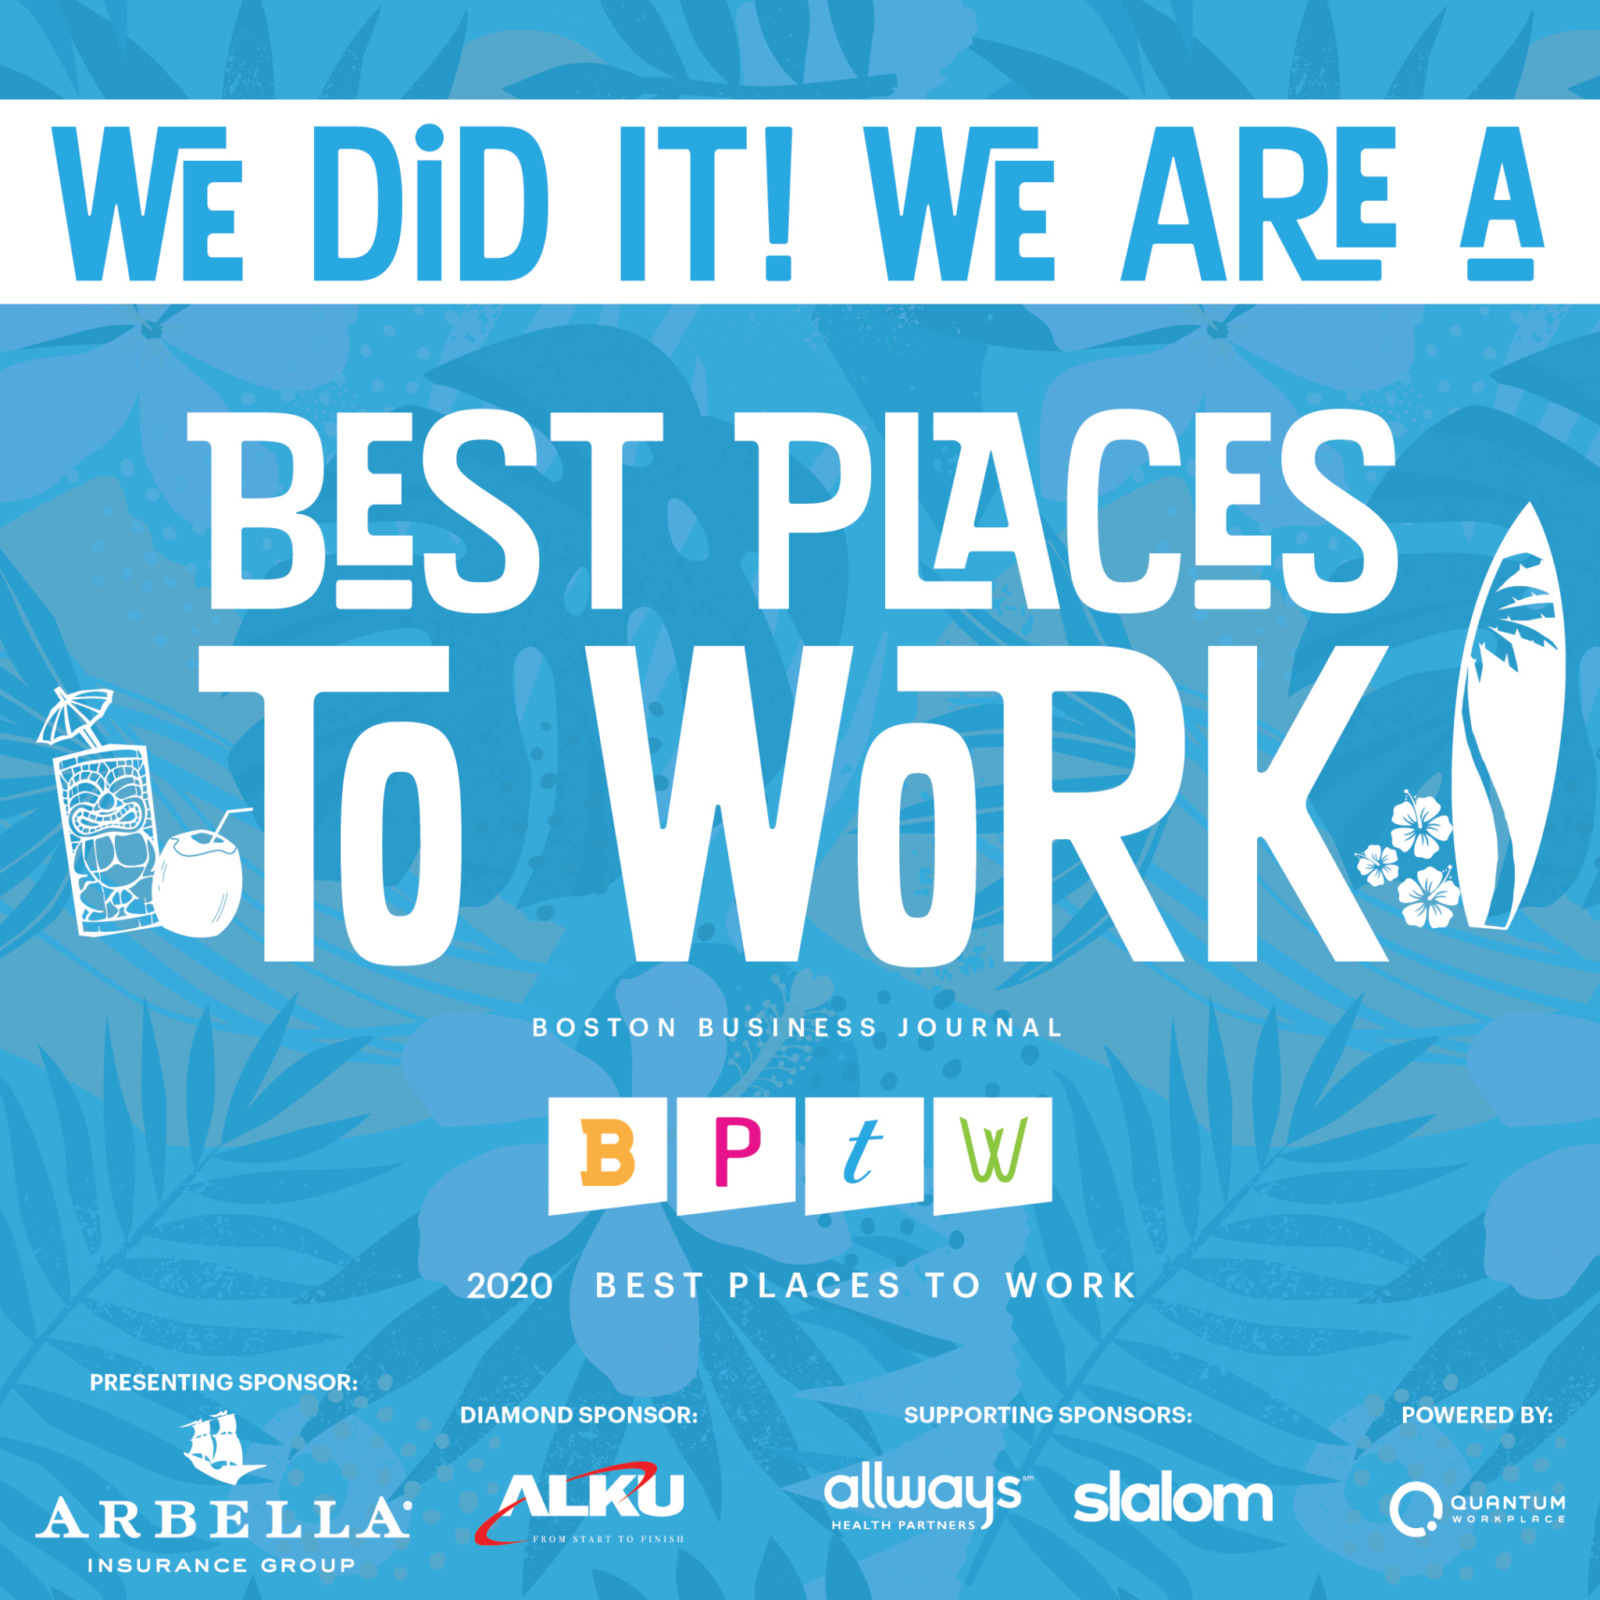 2020 Best Places to Work, Boston Business Journal